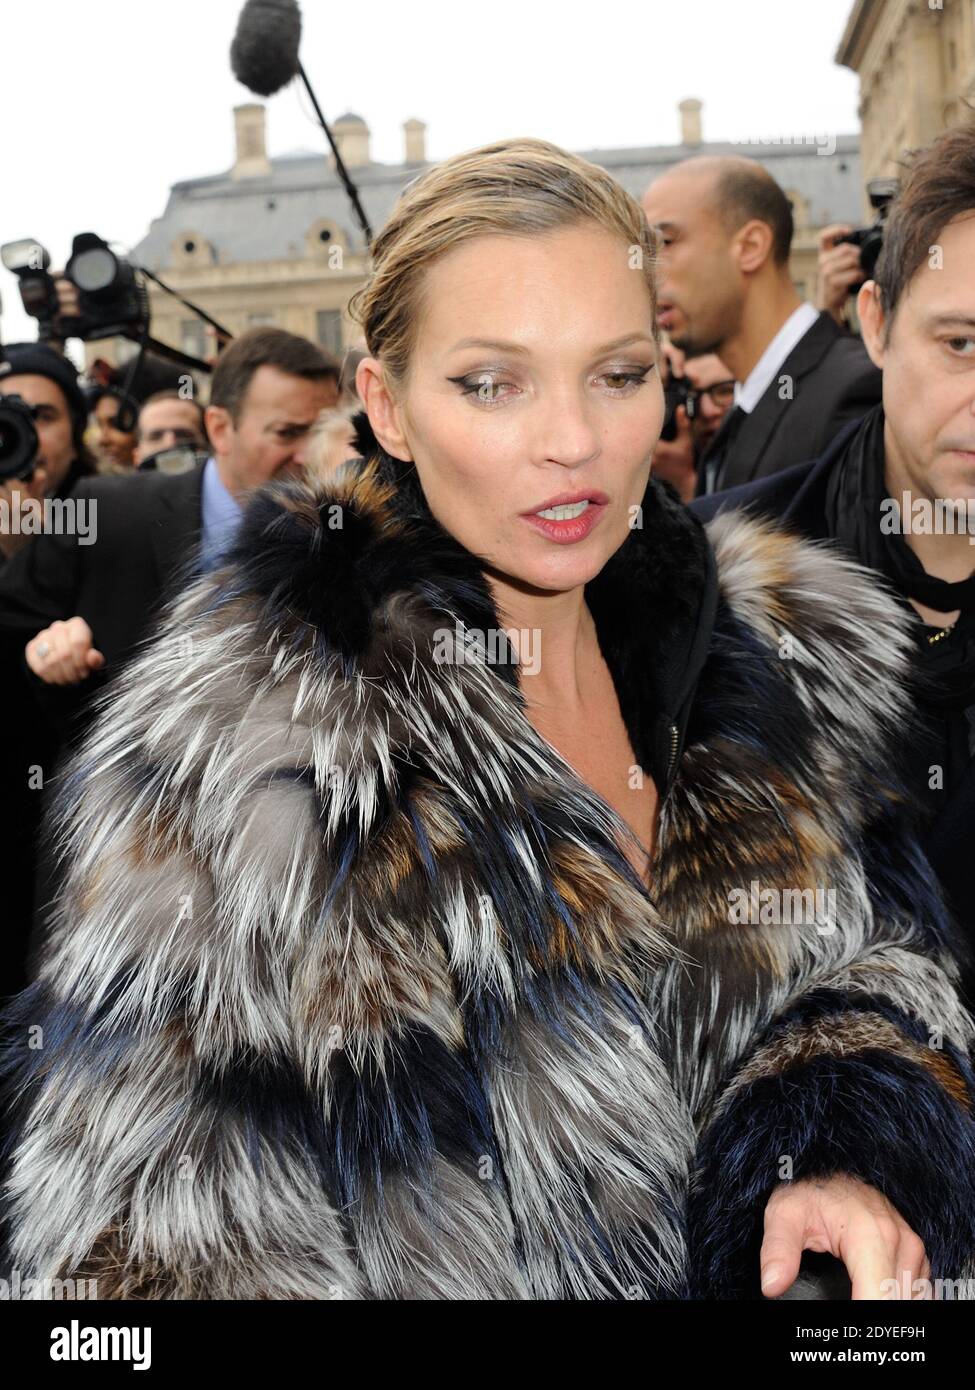 Inside Kate Moss' Hotel Room at Louis Vuitton